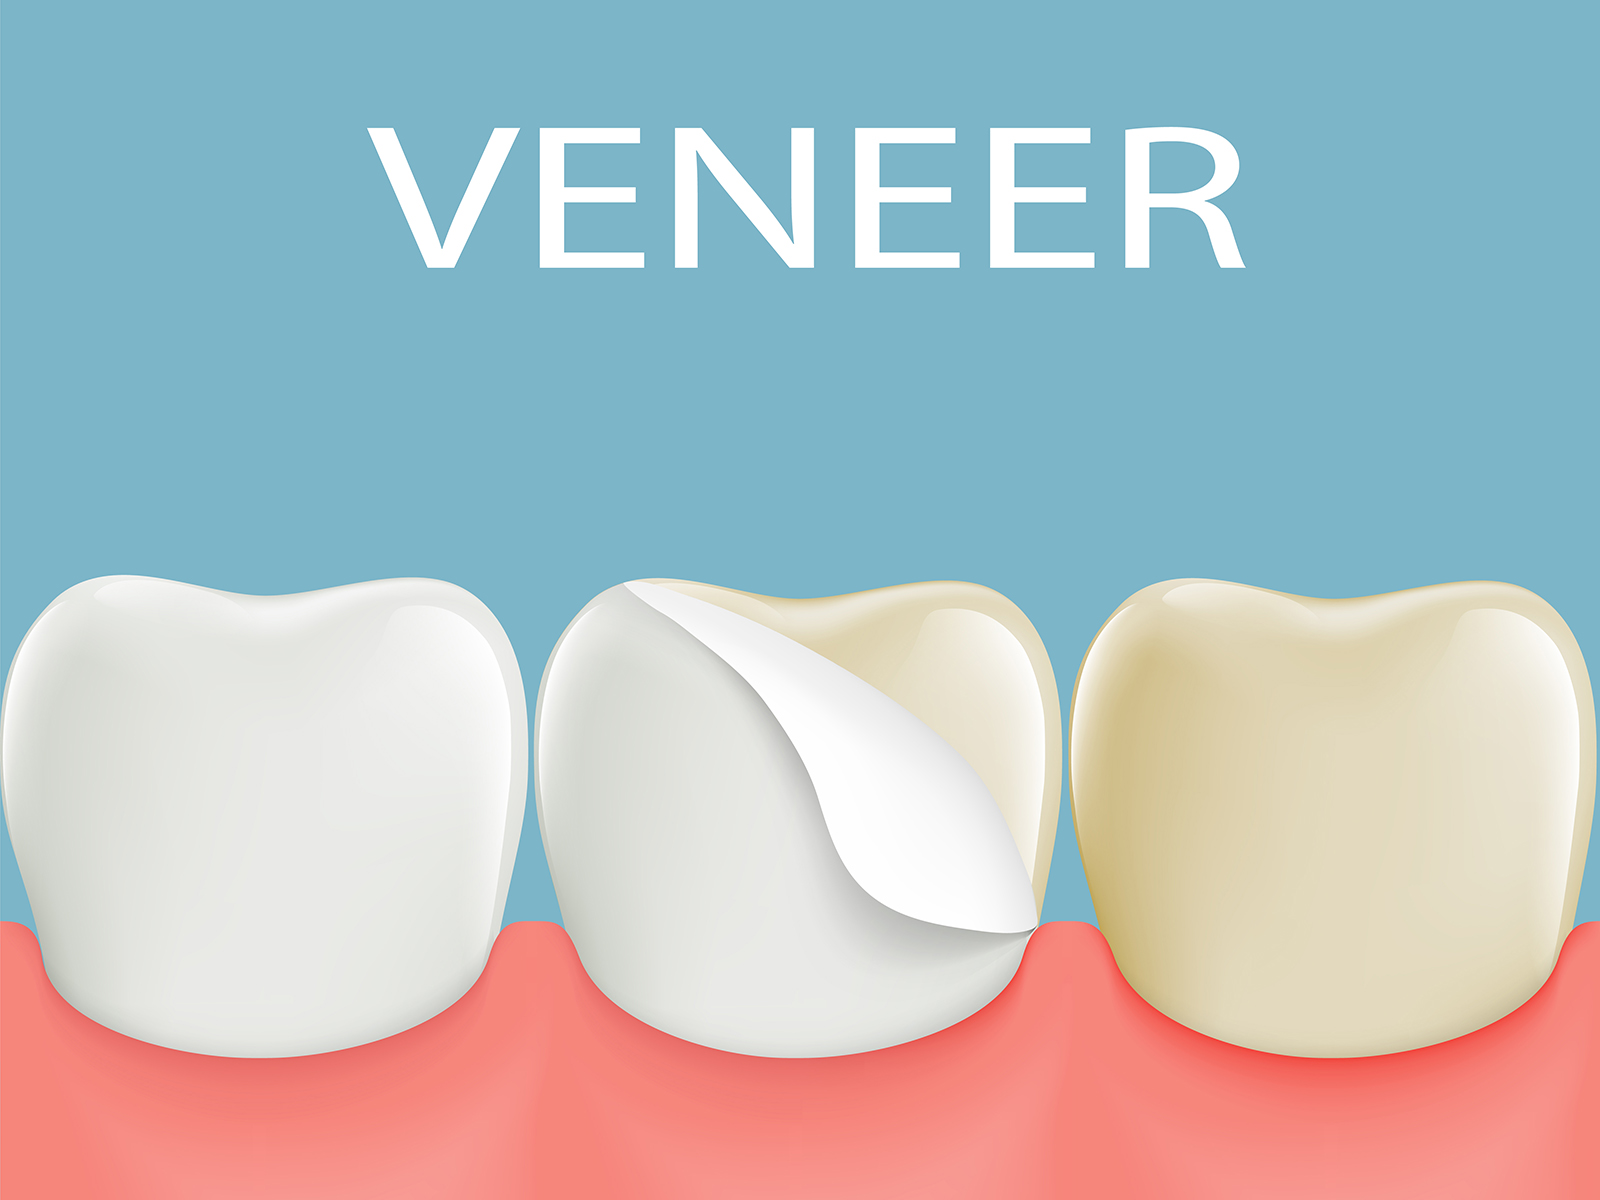 What Is A Veneer, And Why Is It Required?